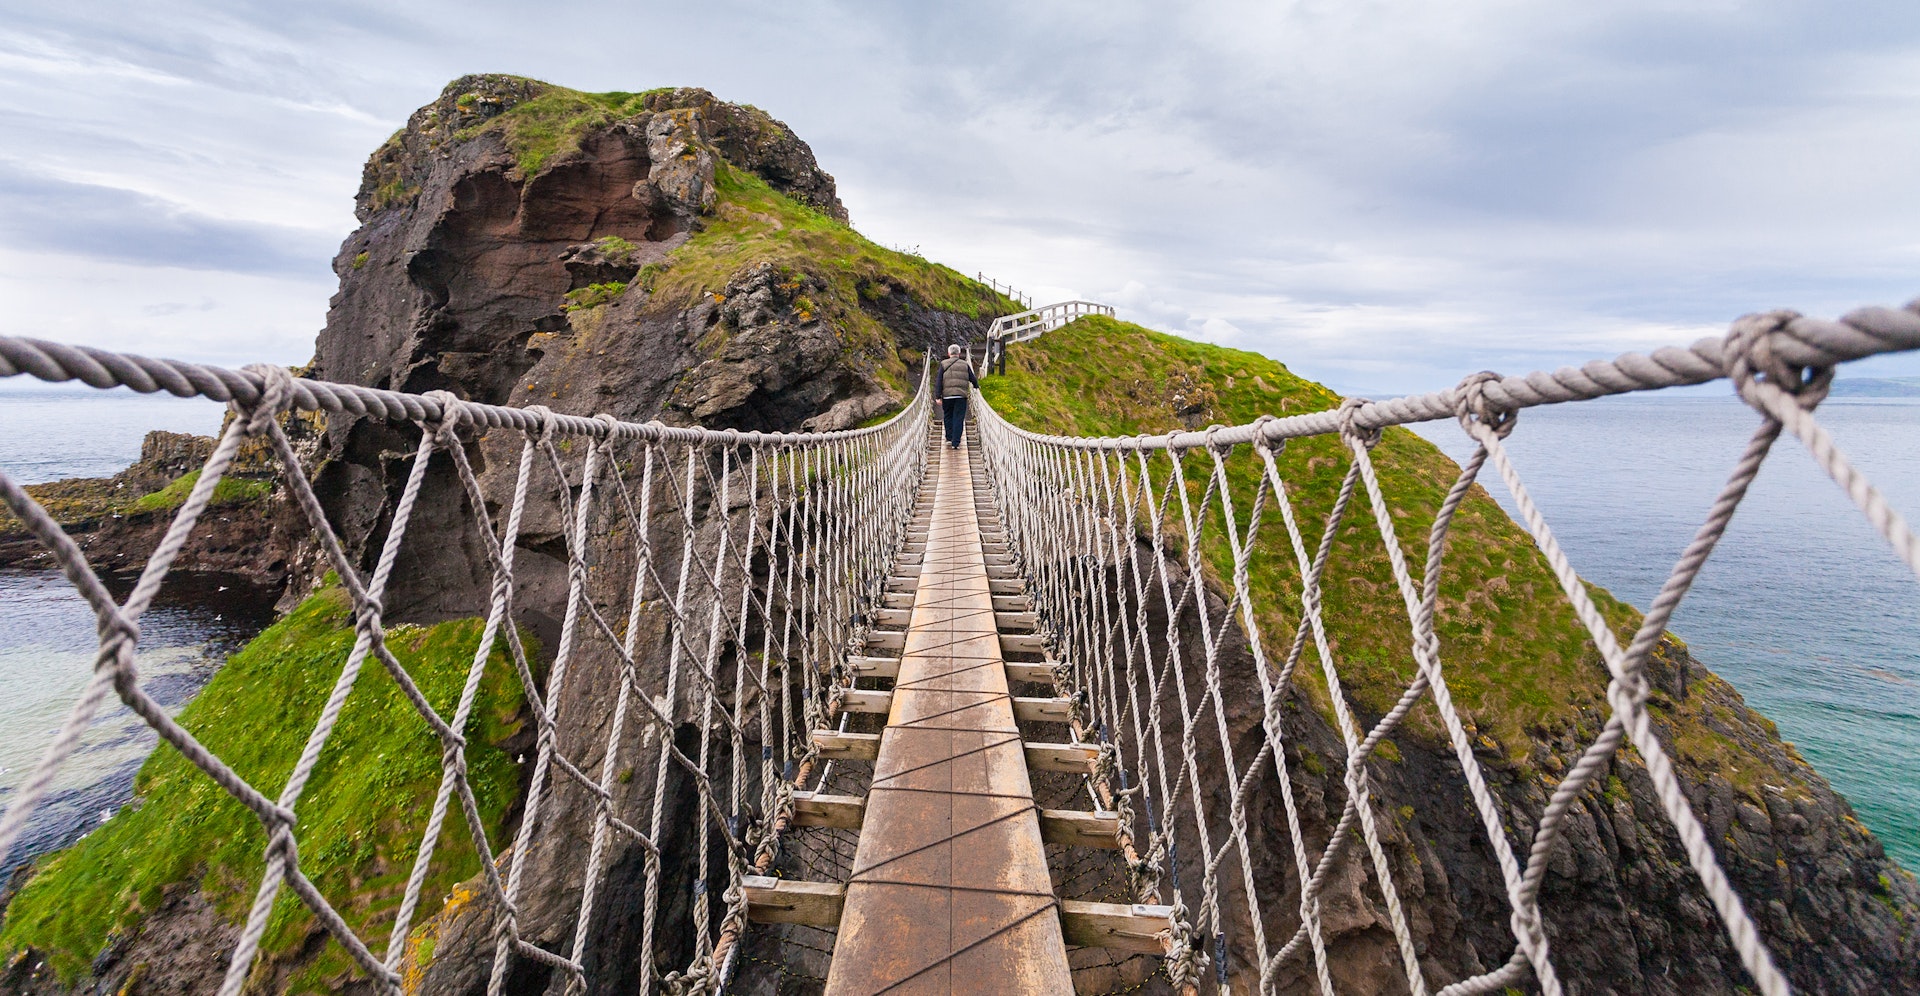 Features - A man crossing the Carrick-a-Rede rope bridge in Antrim, Northern Ireland